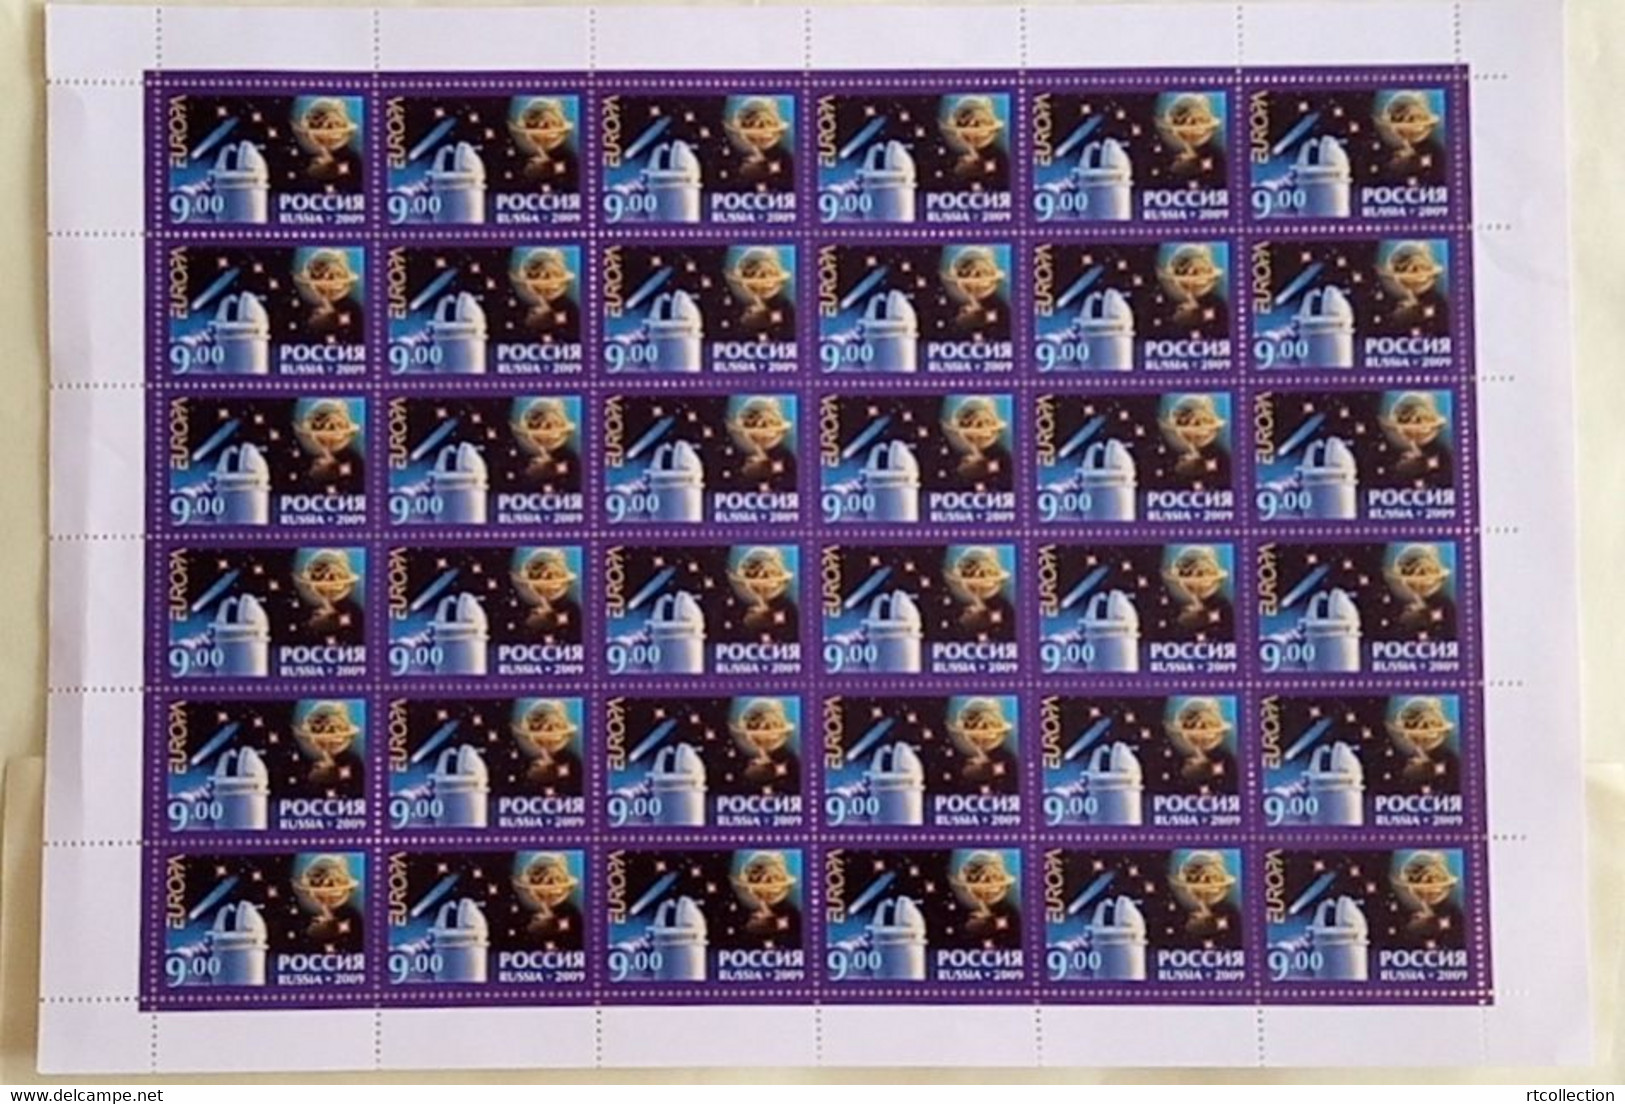 Russia 2009 Sheet Issue By Program Europe Europa-CEPT Europa Sciences Astronomy Space Telescope Stamps Edge Folded - Full Sheets